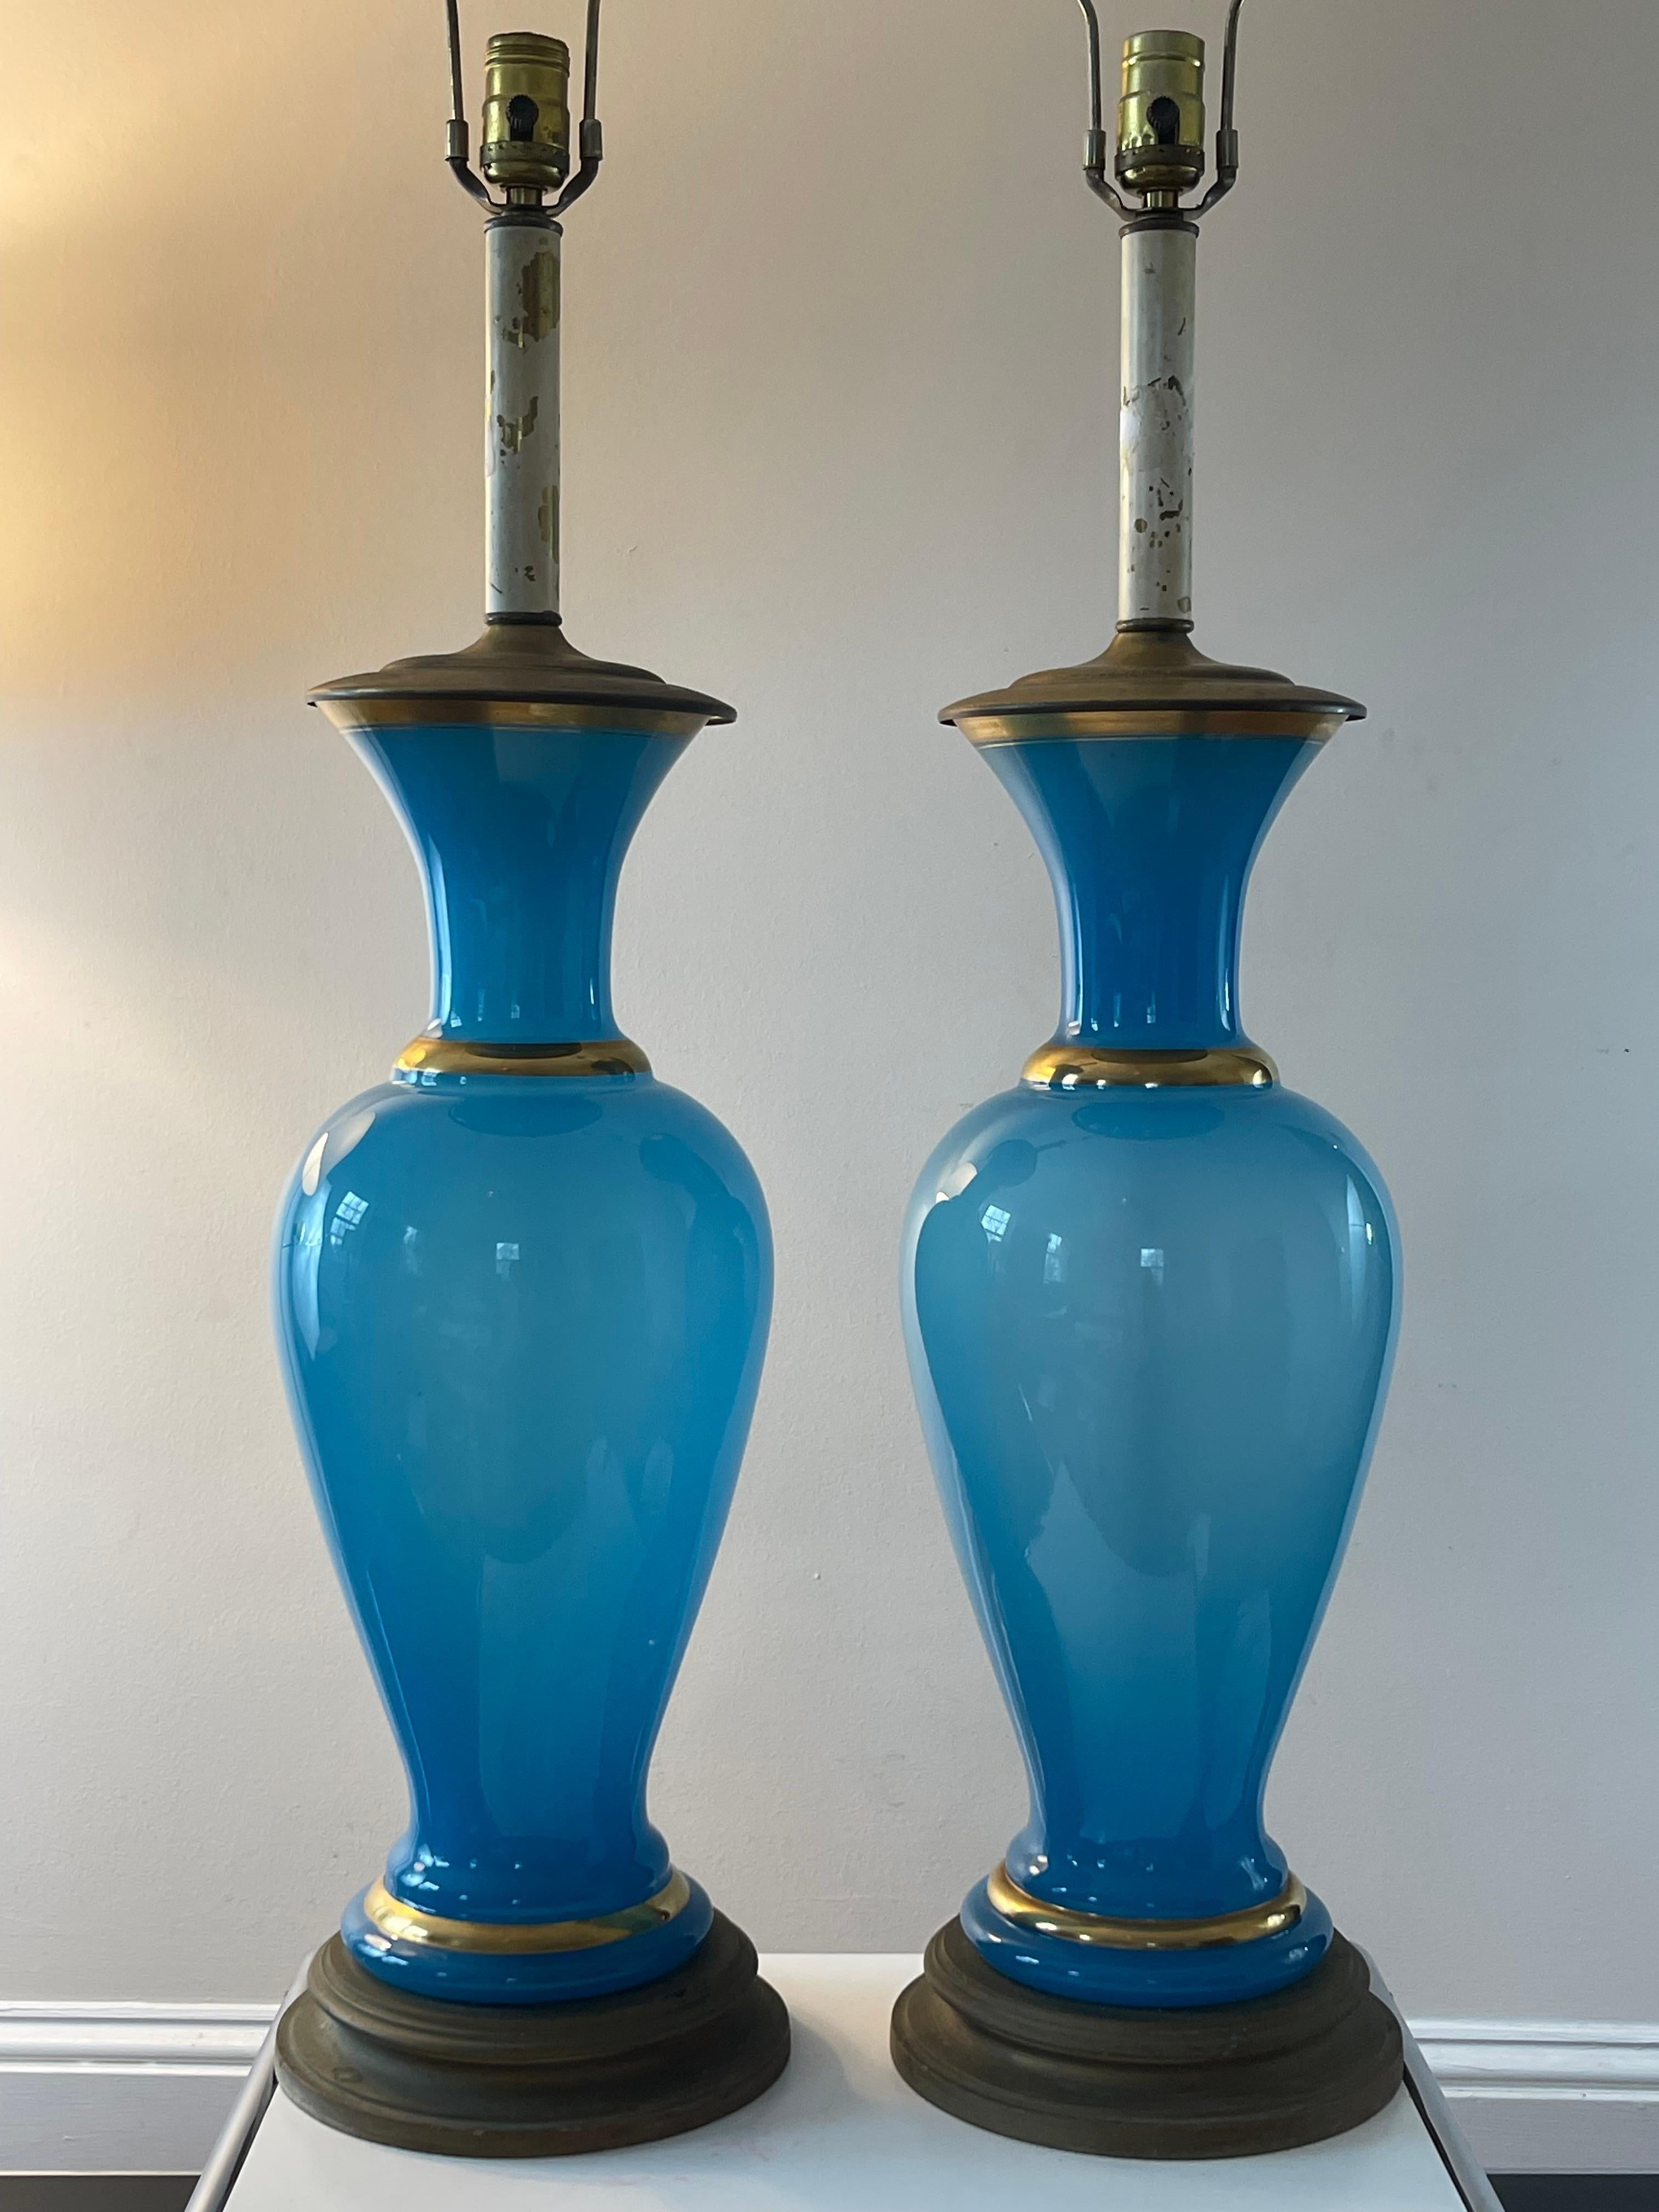 Neoclassical Revival Pair of Turquoise Opaline Lamps For Sale